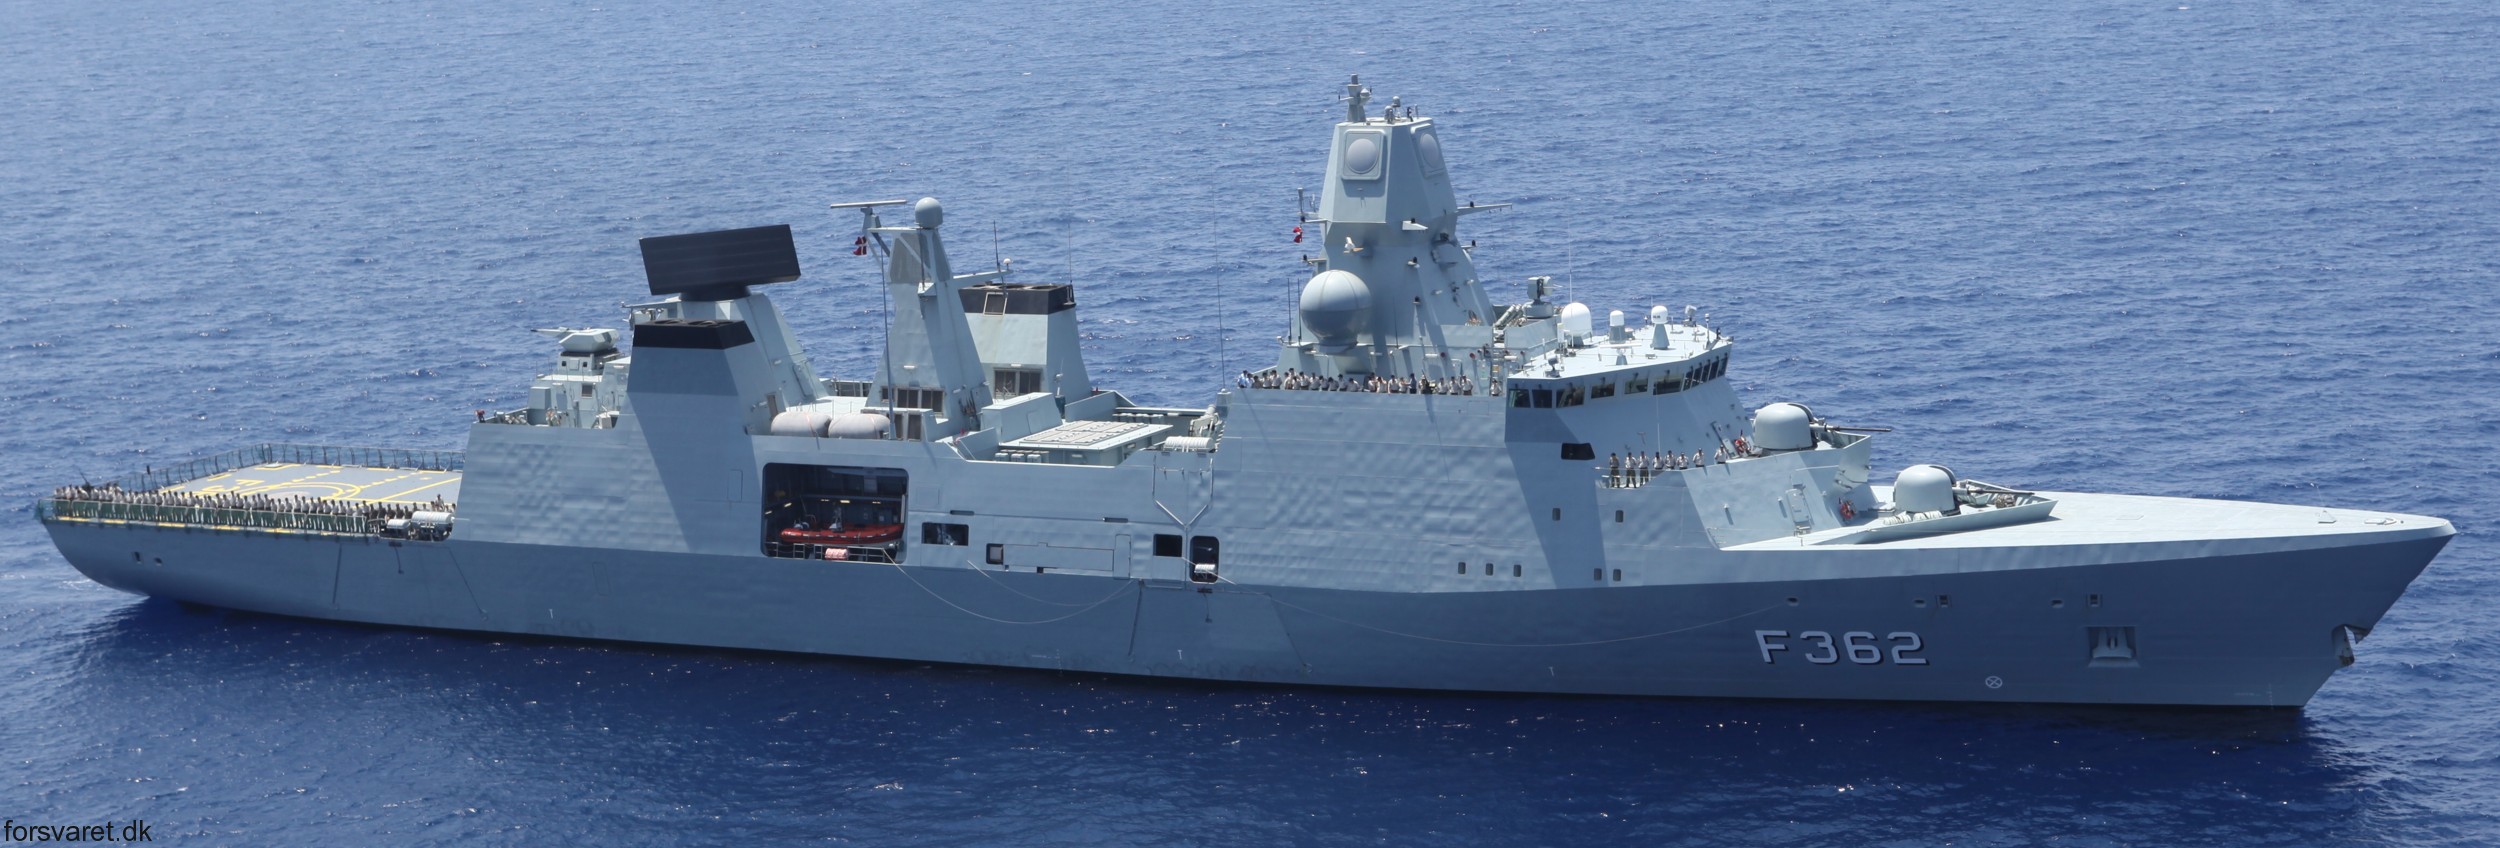 f-362 hdms peter willemoes iver huitfeldt class guided missile frigate ffg royal danish navy 34